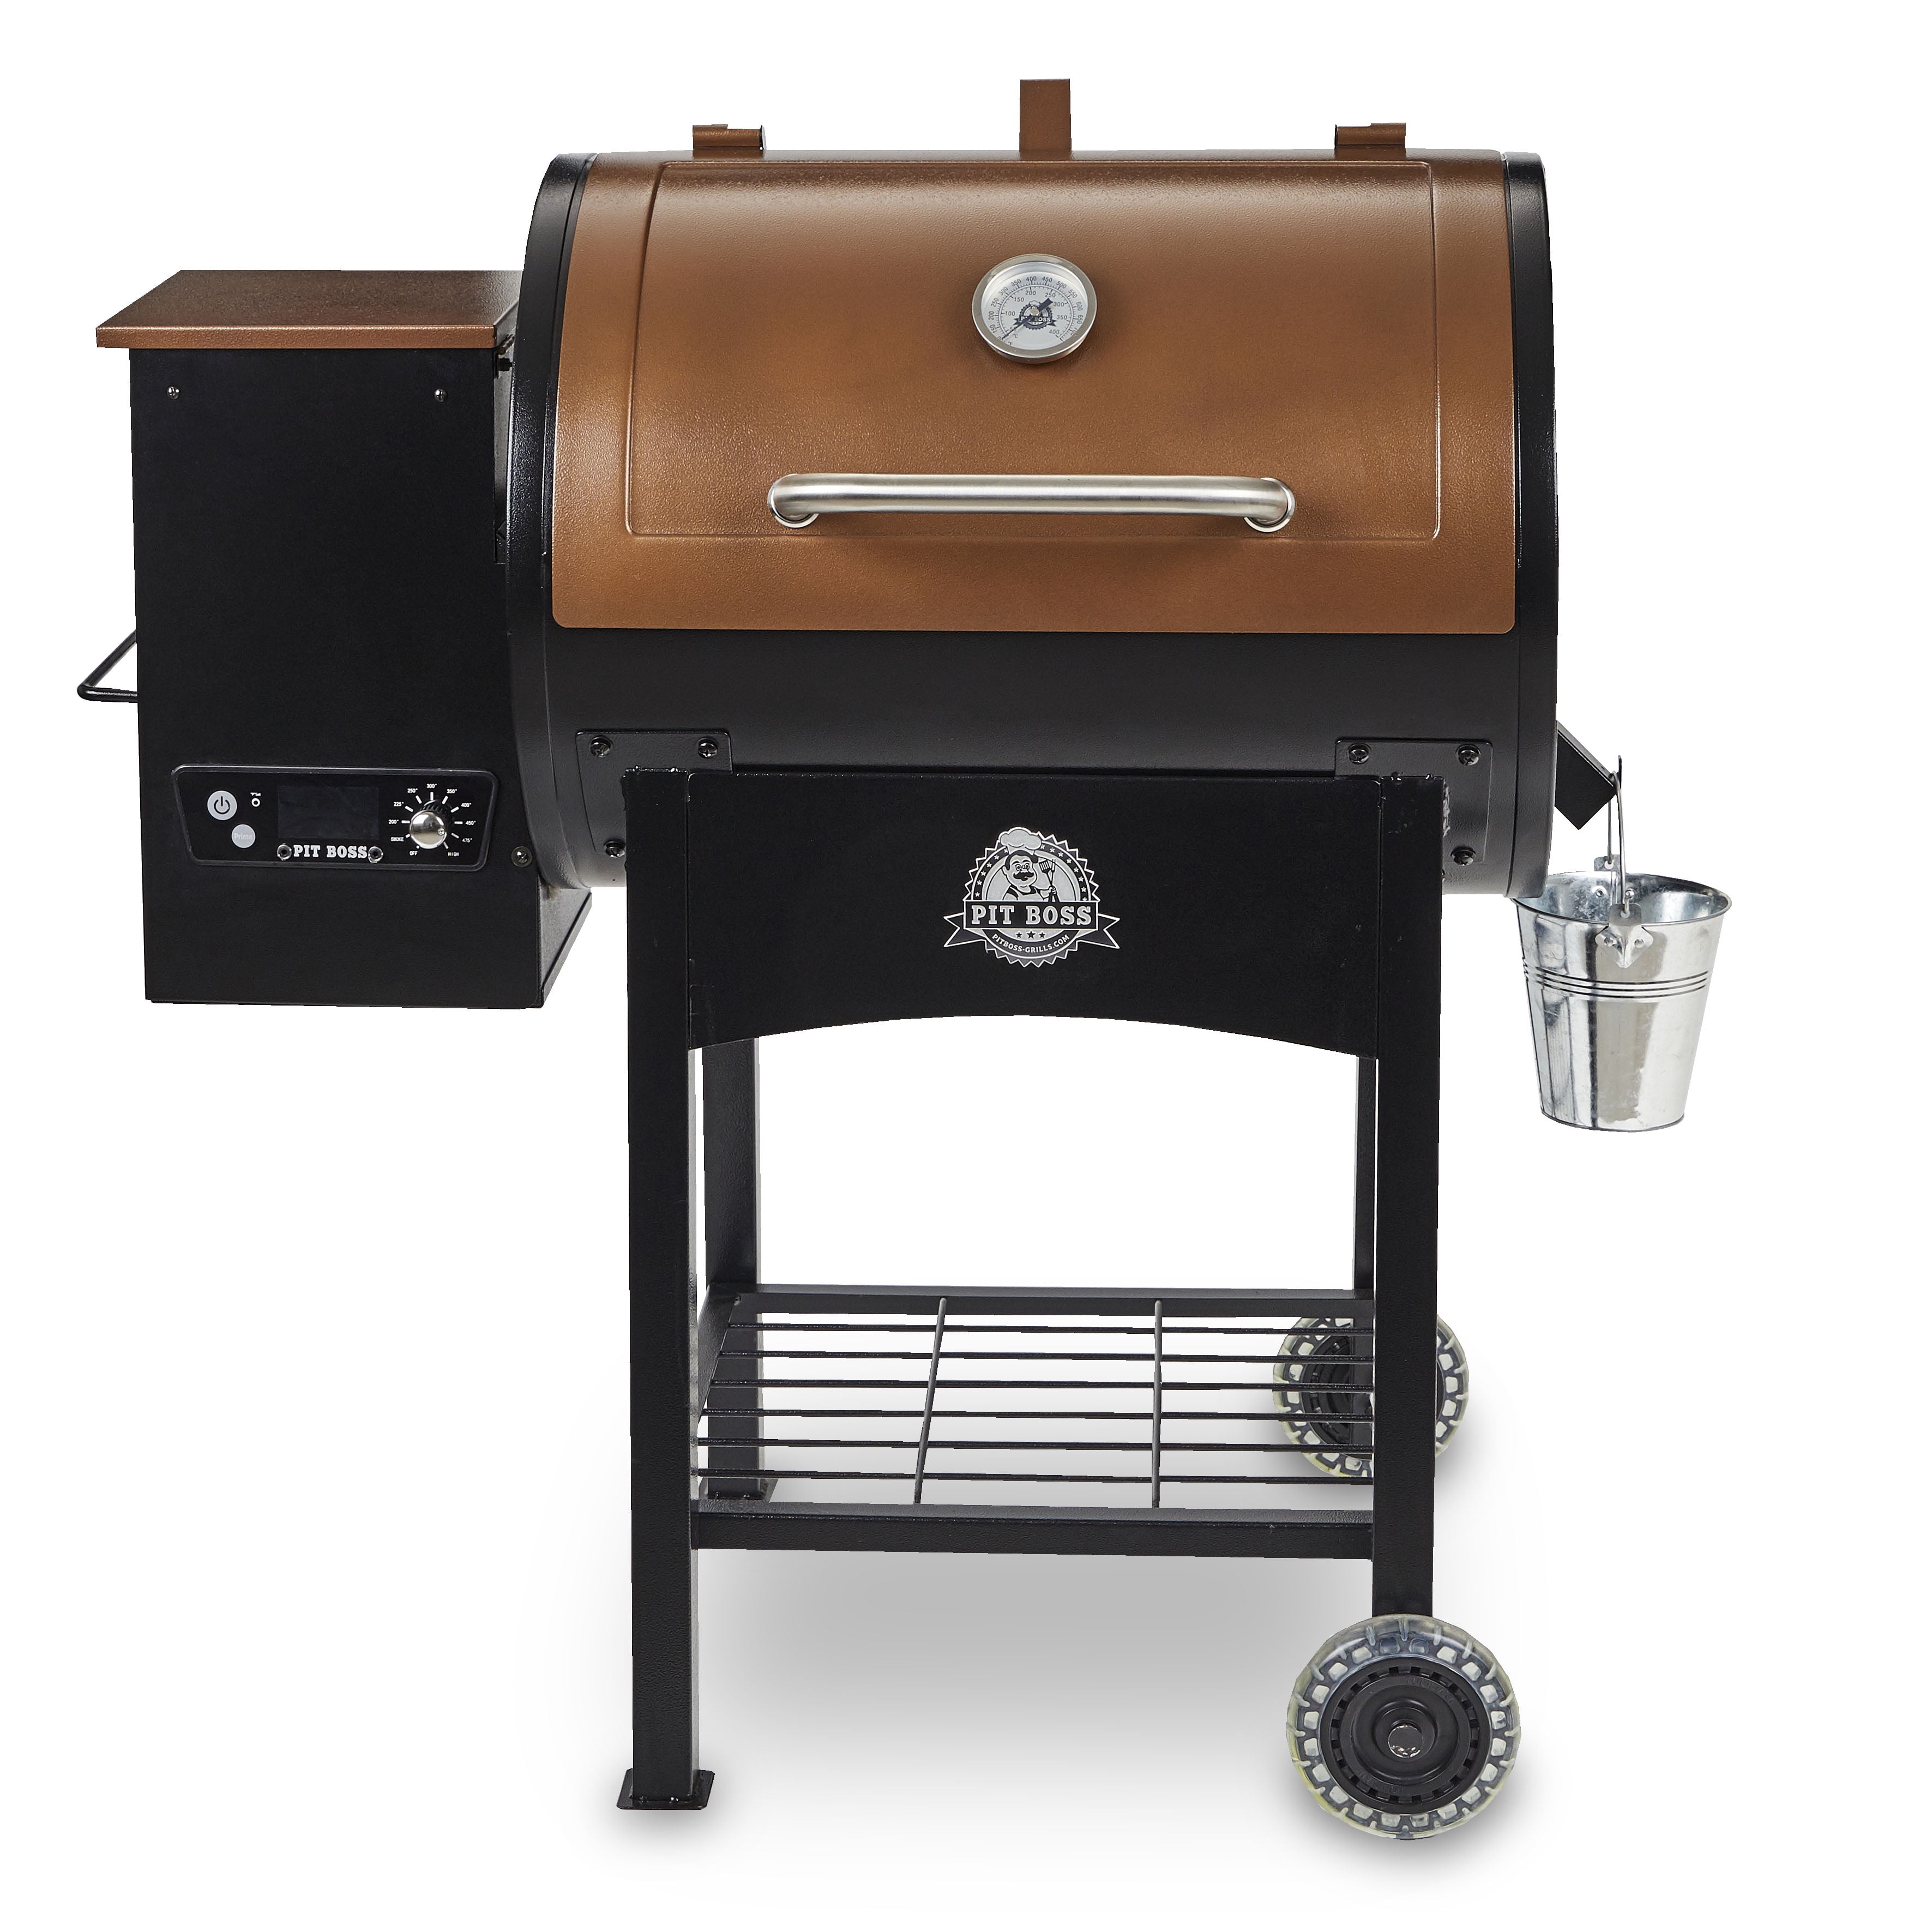 Pit Boss Classic 700 sq. in. Wood Fired Pellet Grill w/ Flame Broiler, Copper/Black